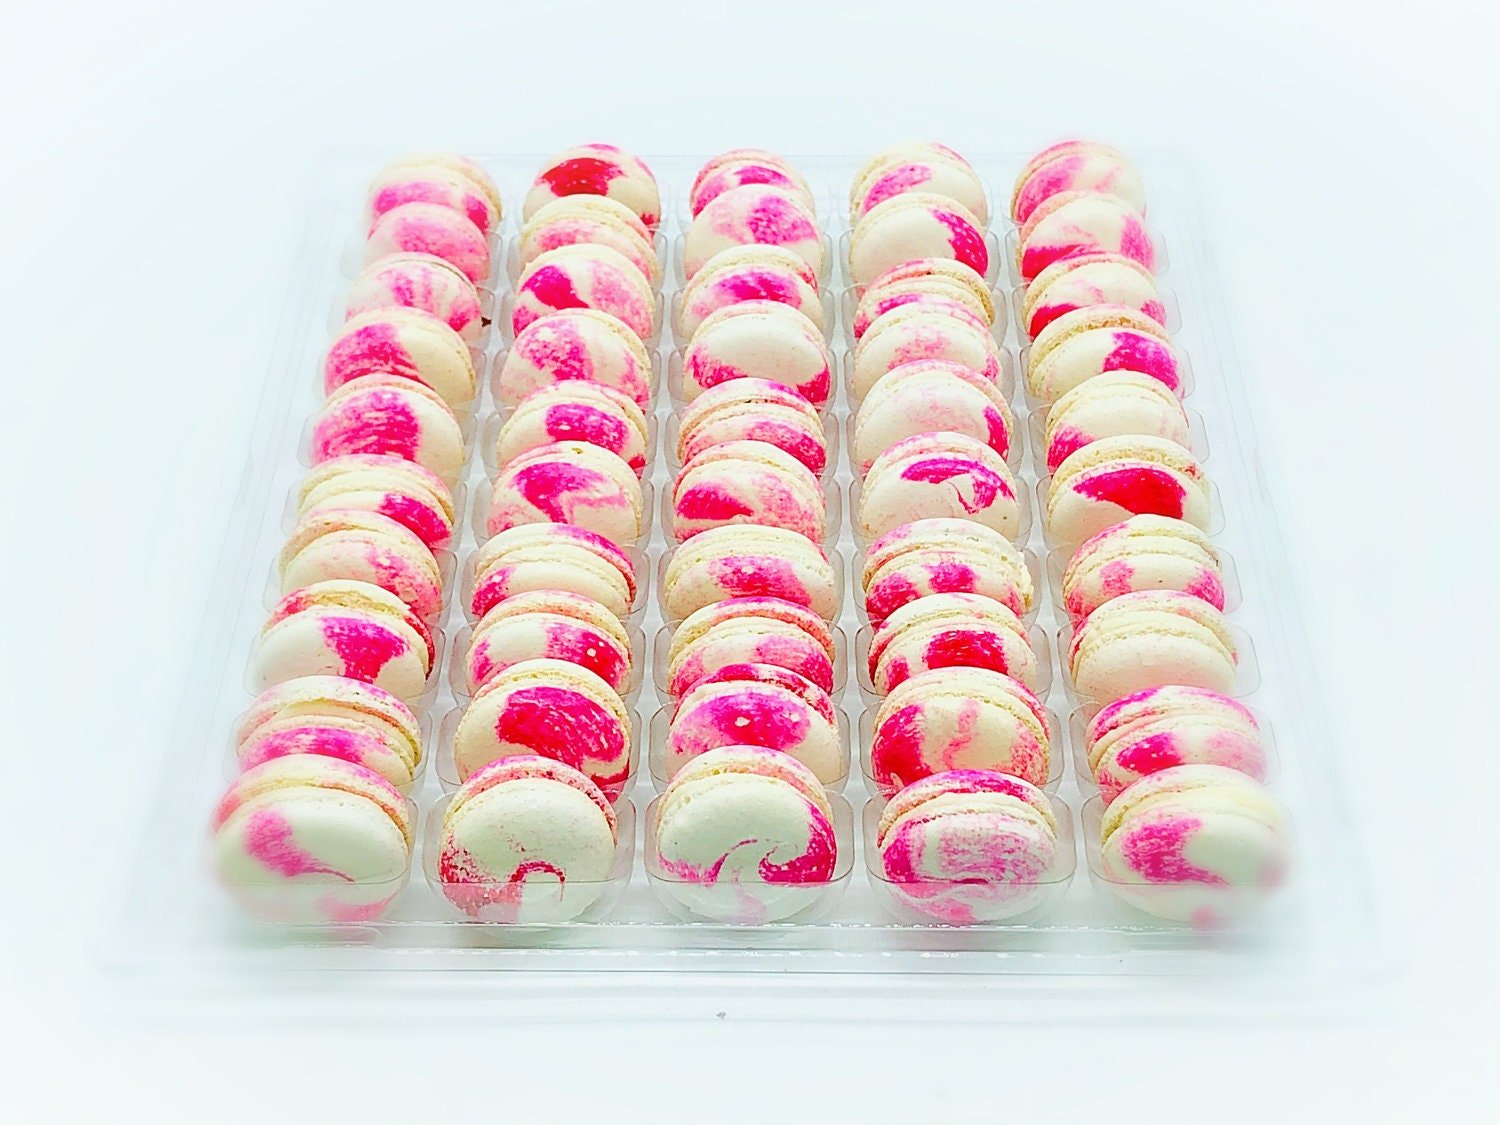 50 Pack Raspberry Cheesecake French Macaron Value Pack - Macaron Centrale